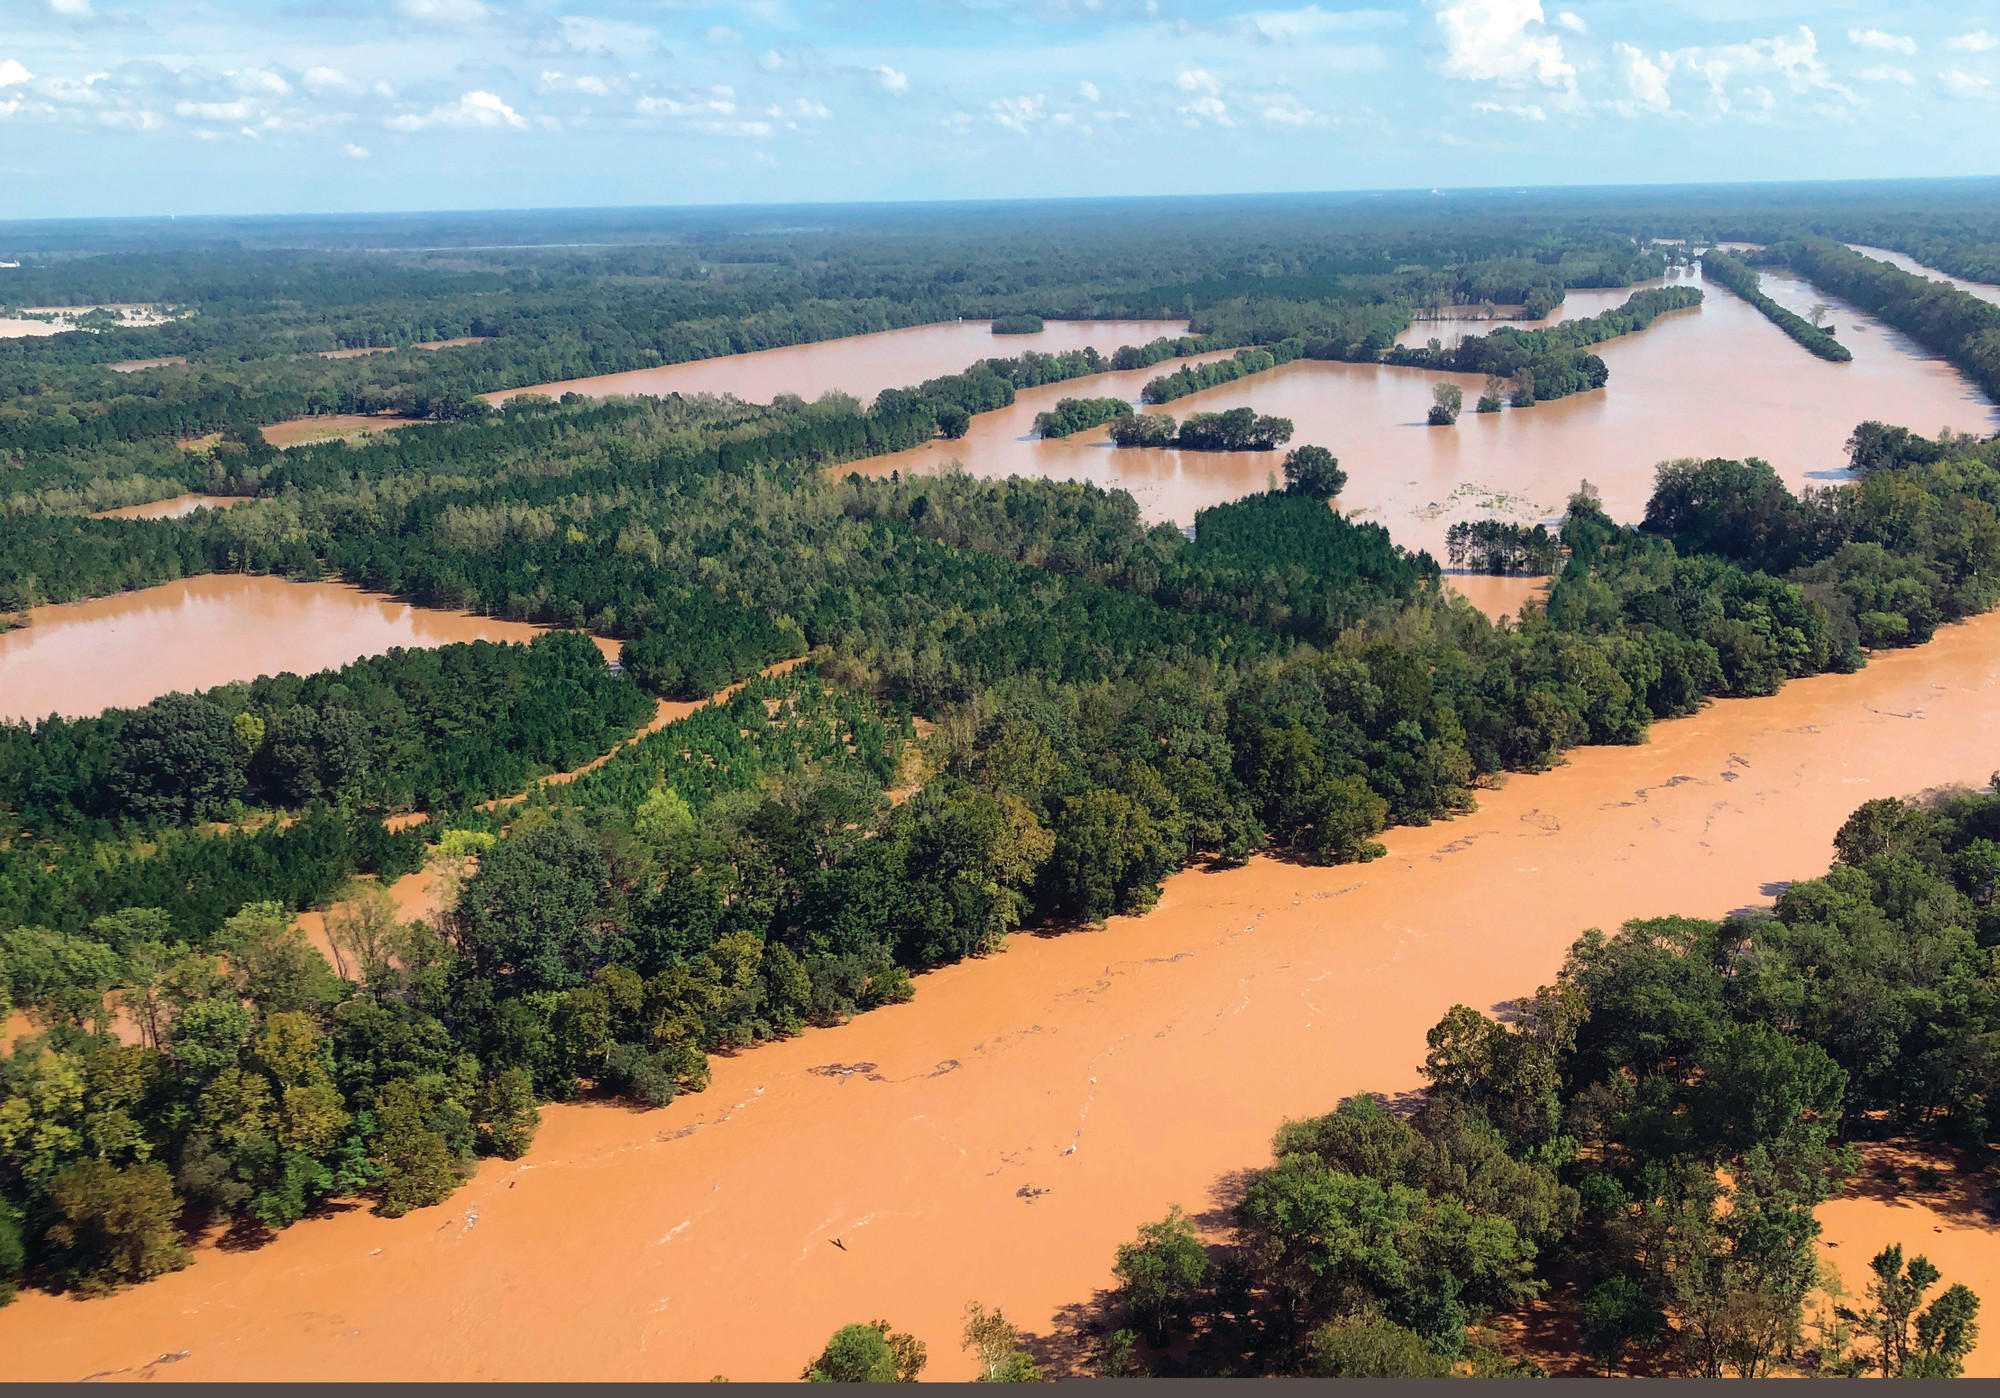 This Monday, Sept. 17, 2018, photo shows rising flood waters in the Pee Dee area in Marion County, S.C. Two female mental health patients detained for medical transport drowned Tuesday, Sept. 18, when a sheriff's department van was swept away in rising floodwaters, according to authorities.